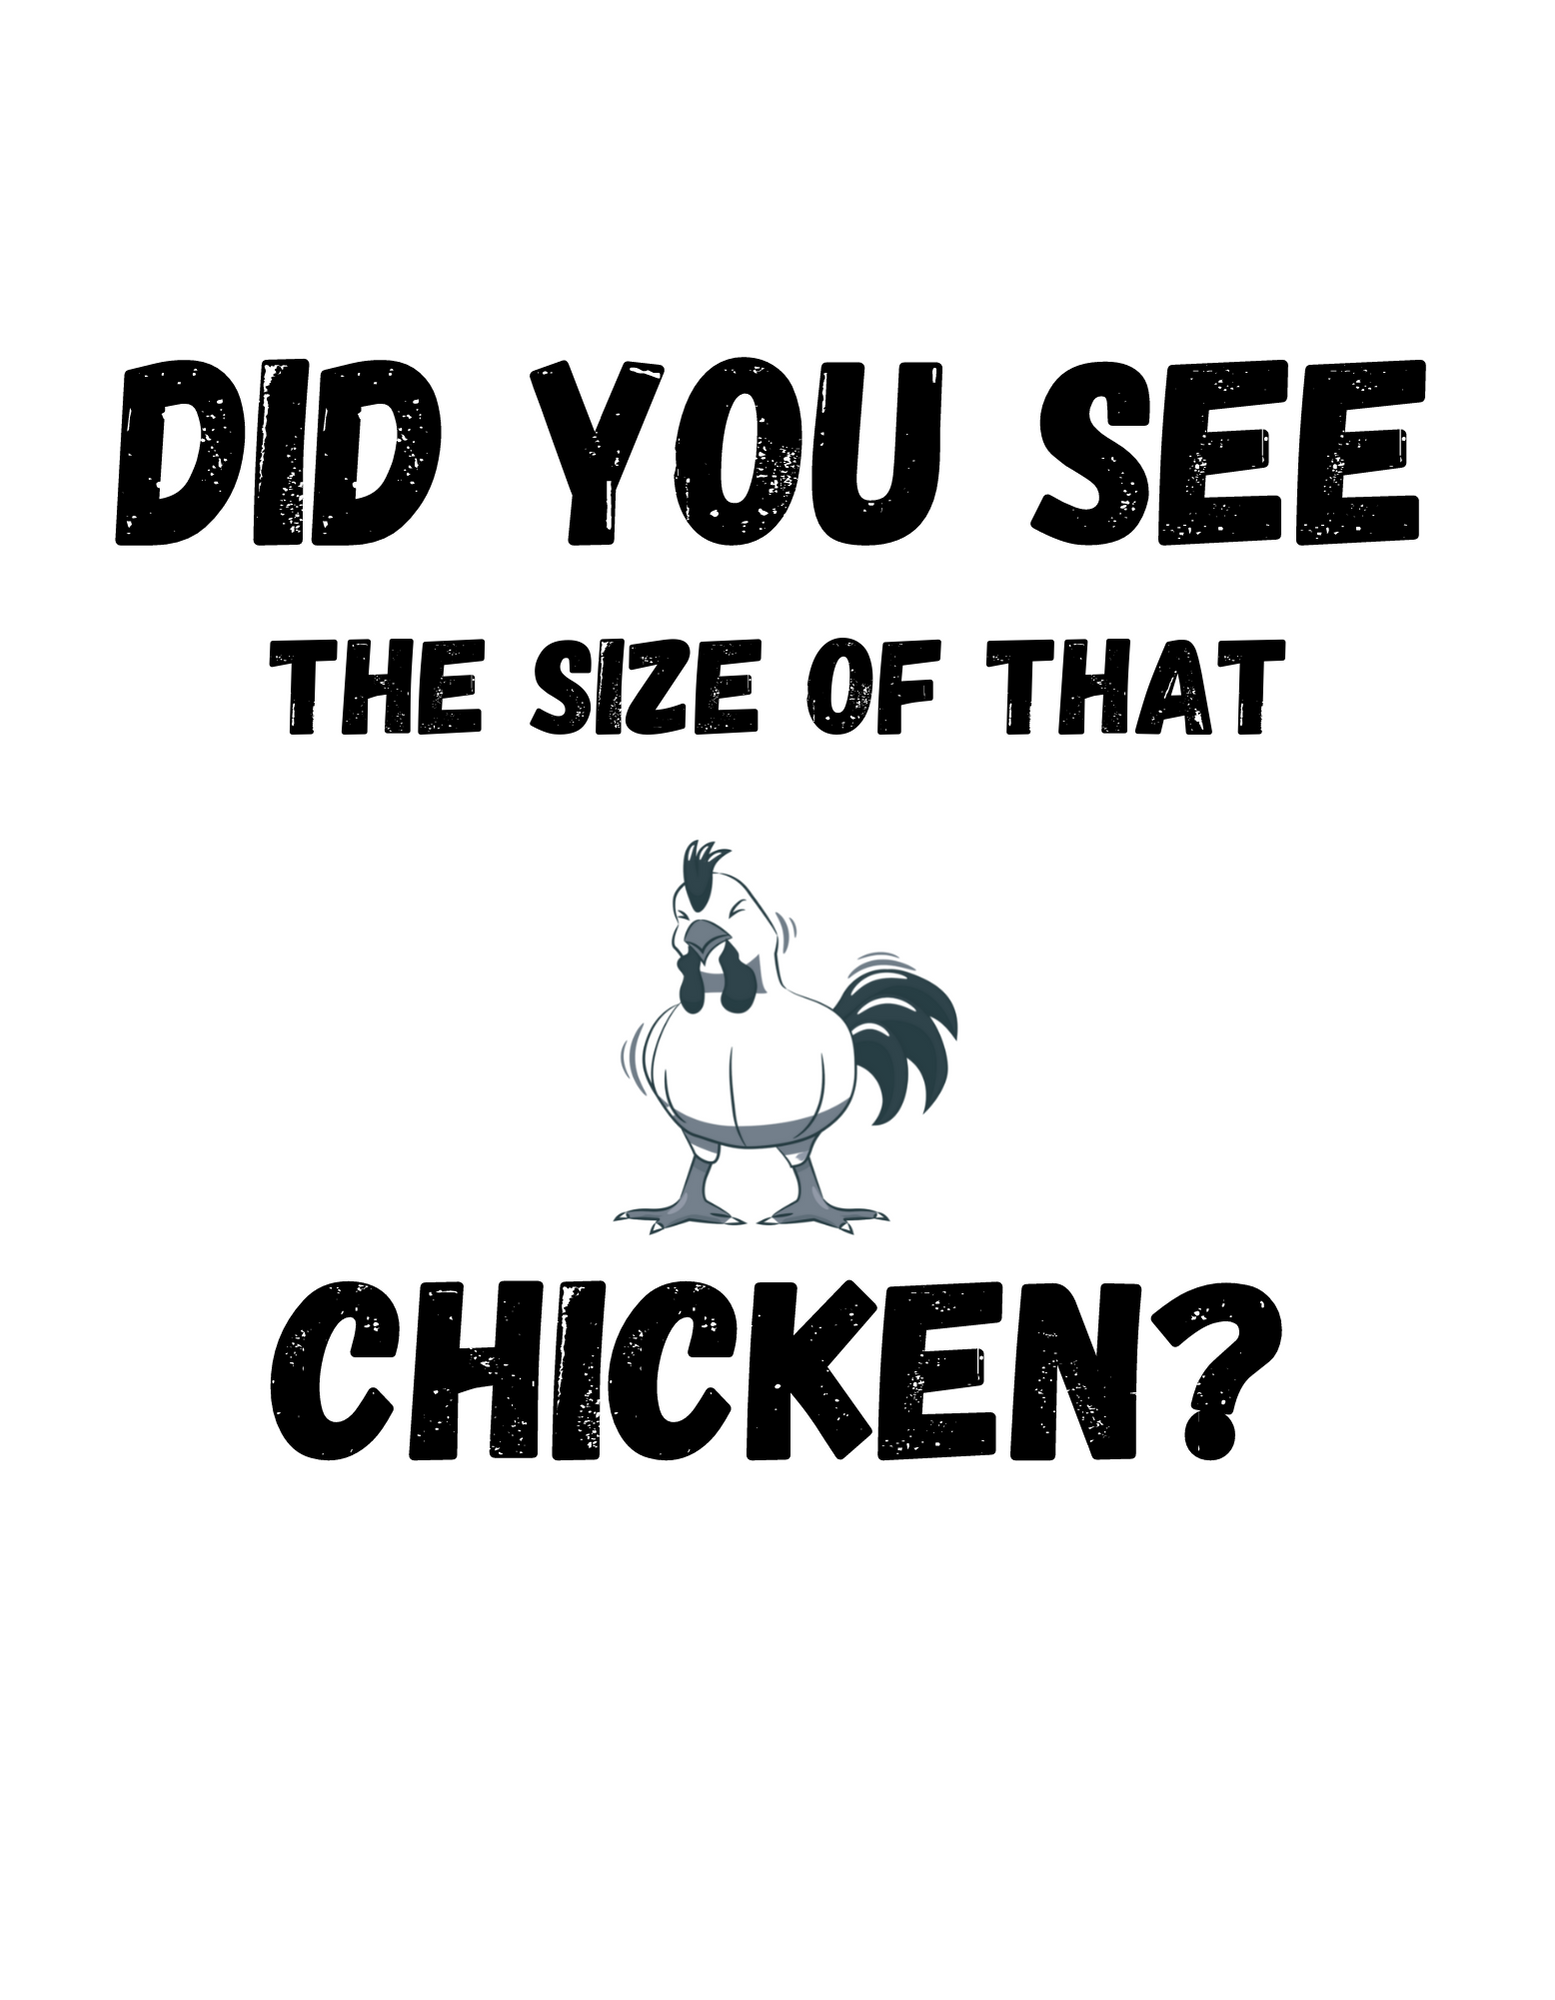 Size of That Chicken